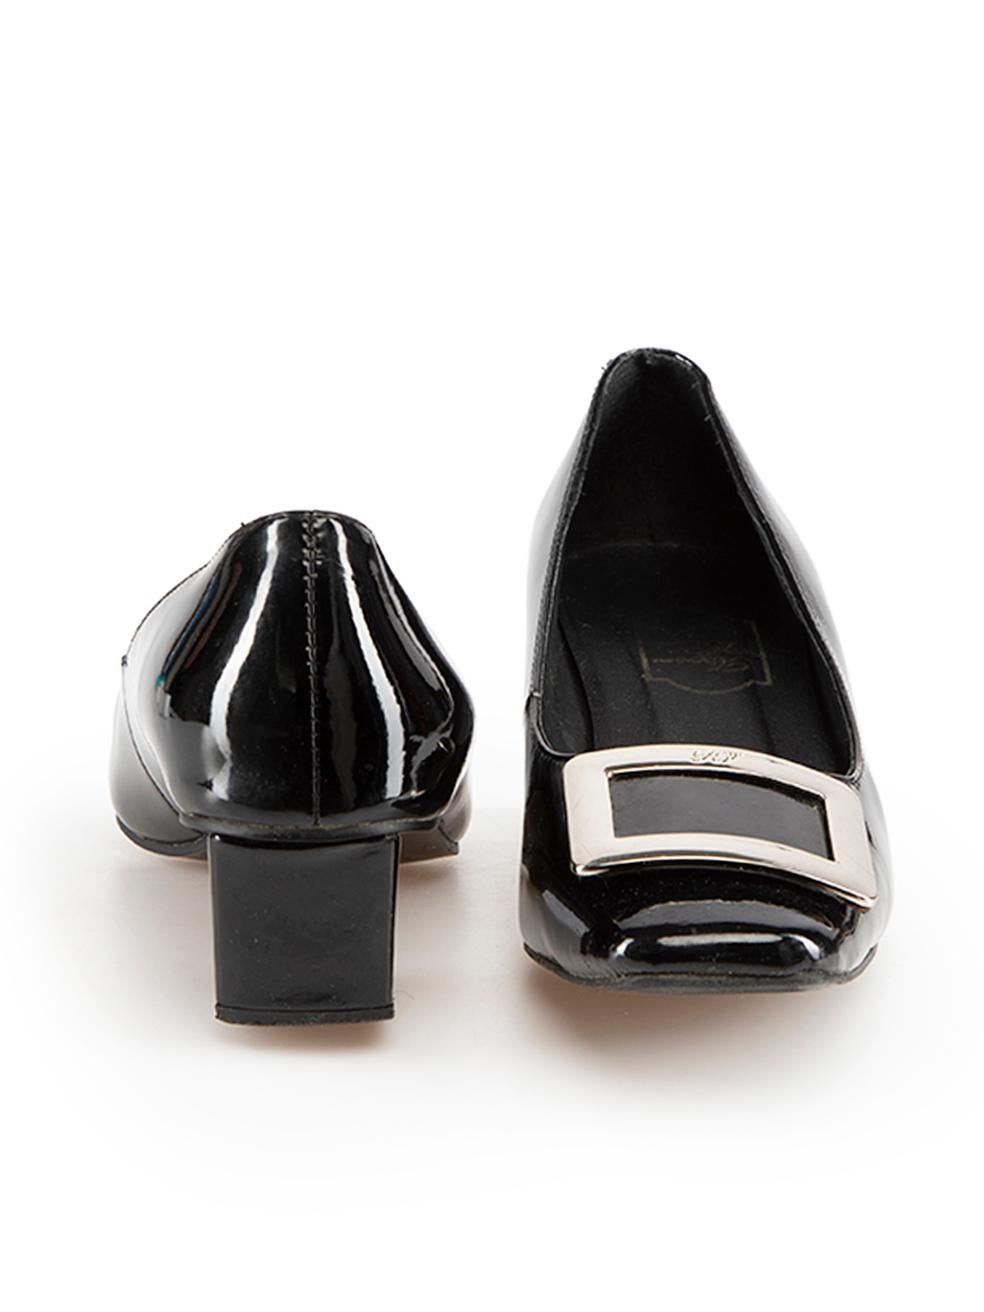 Roger Vivier Black Patent Leather Buckle Pumps Size IT 37 In Good Condition For Sale In London, GB